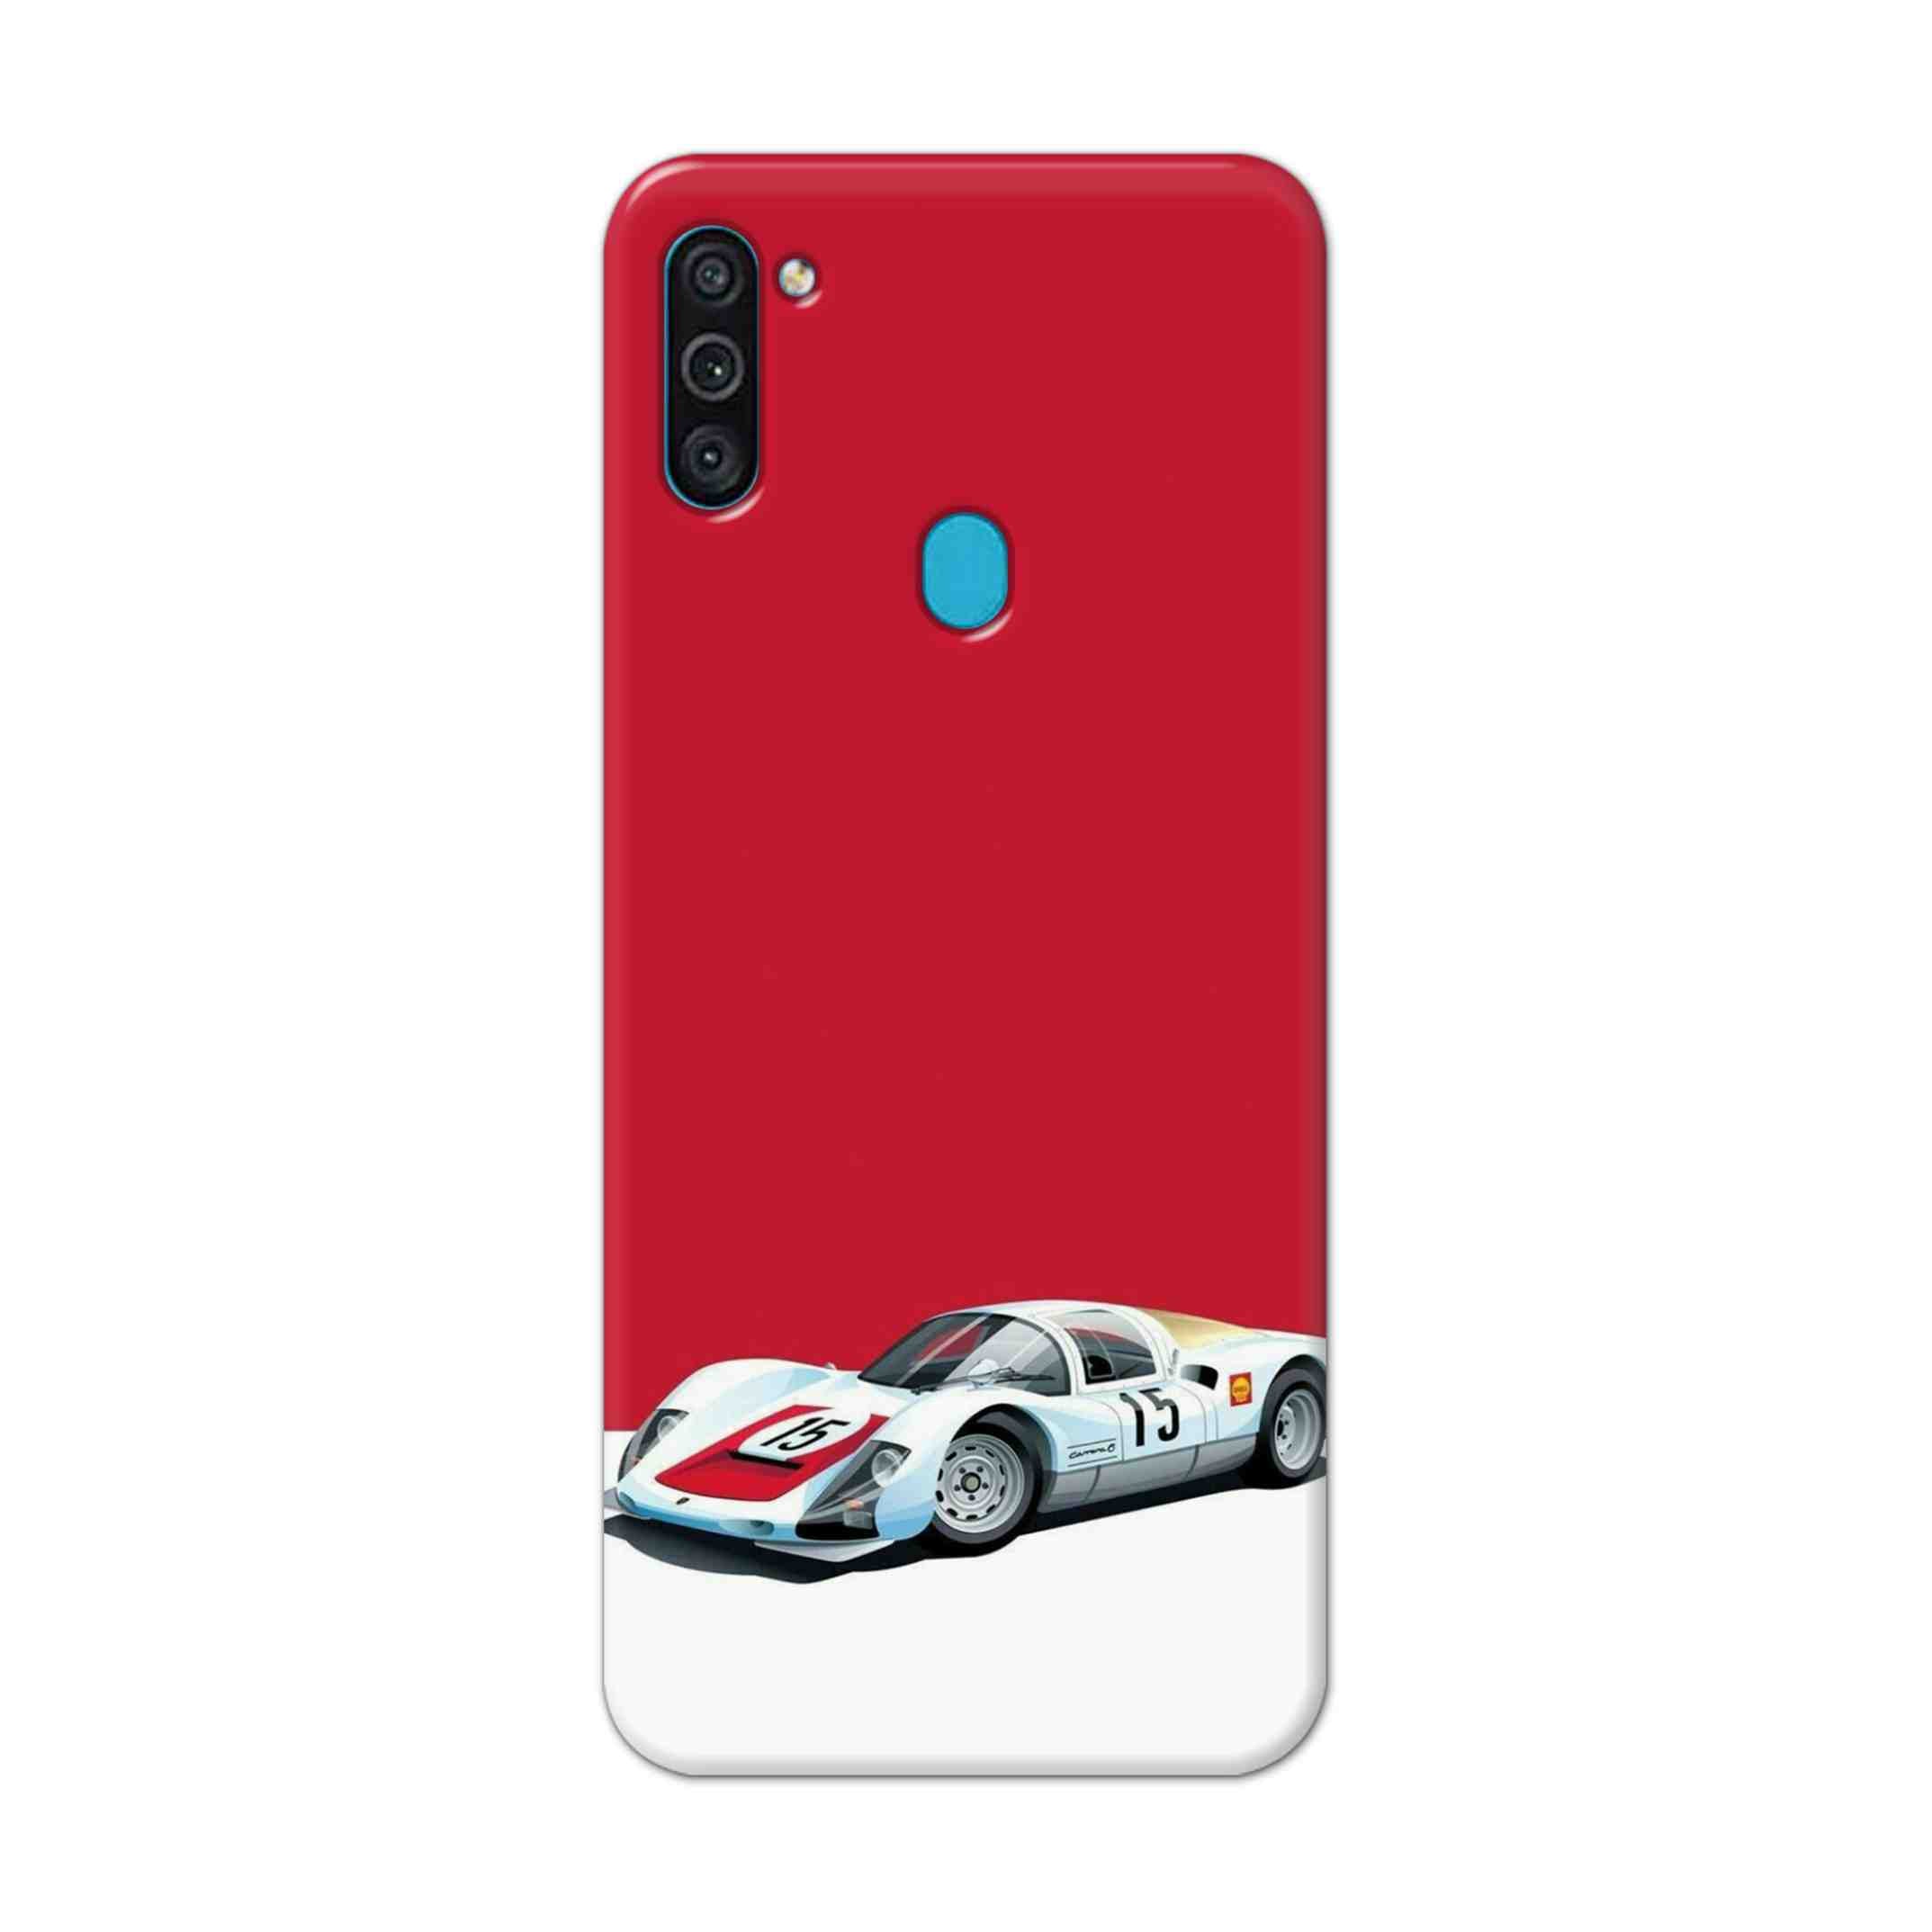 Buy Ferrari F15 Hard Back Mobile Phone Case Cover For Samsung Galaxy M11 Online